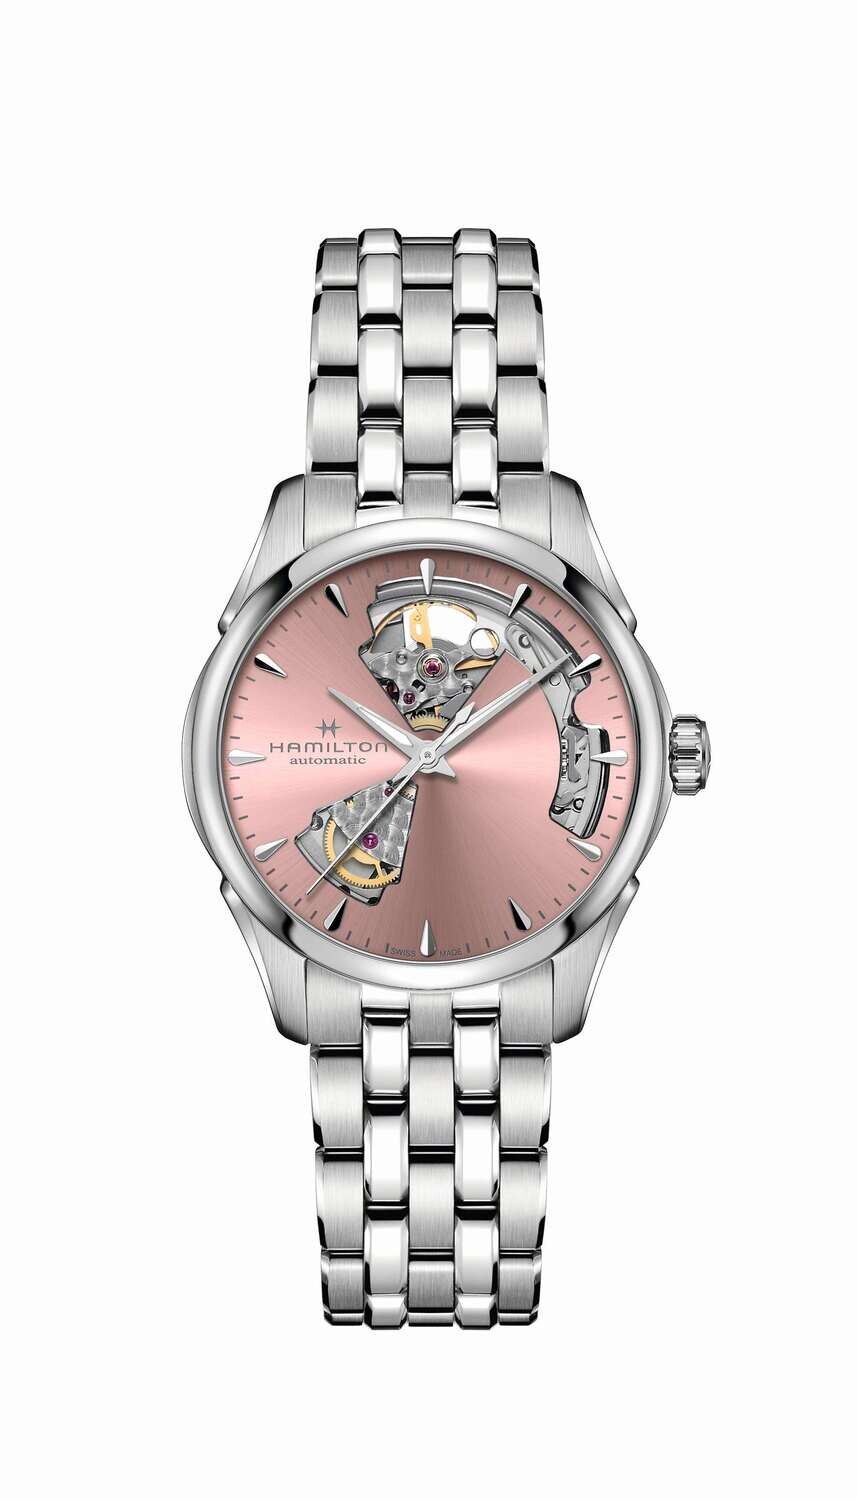 JAZZMASTER
OPEN HEART LADY AUTO
Carica automatica 36mm H32215170